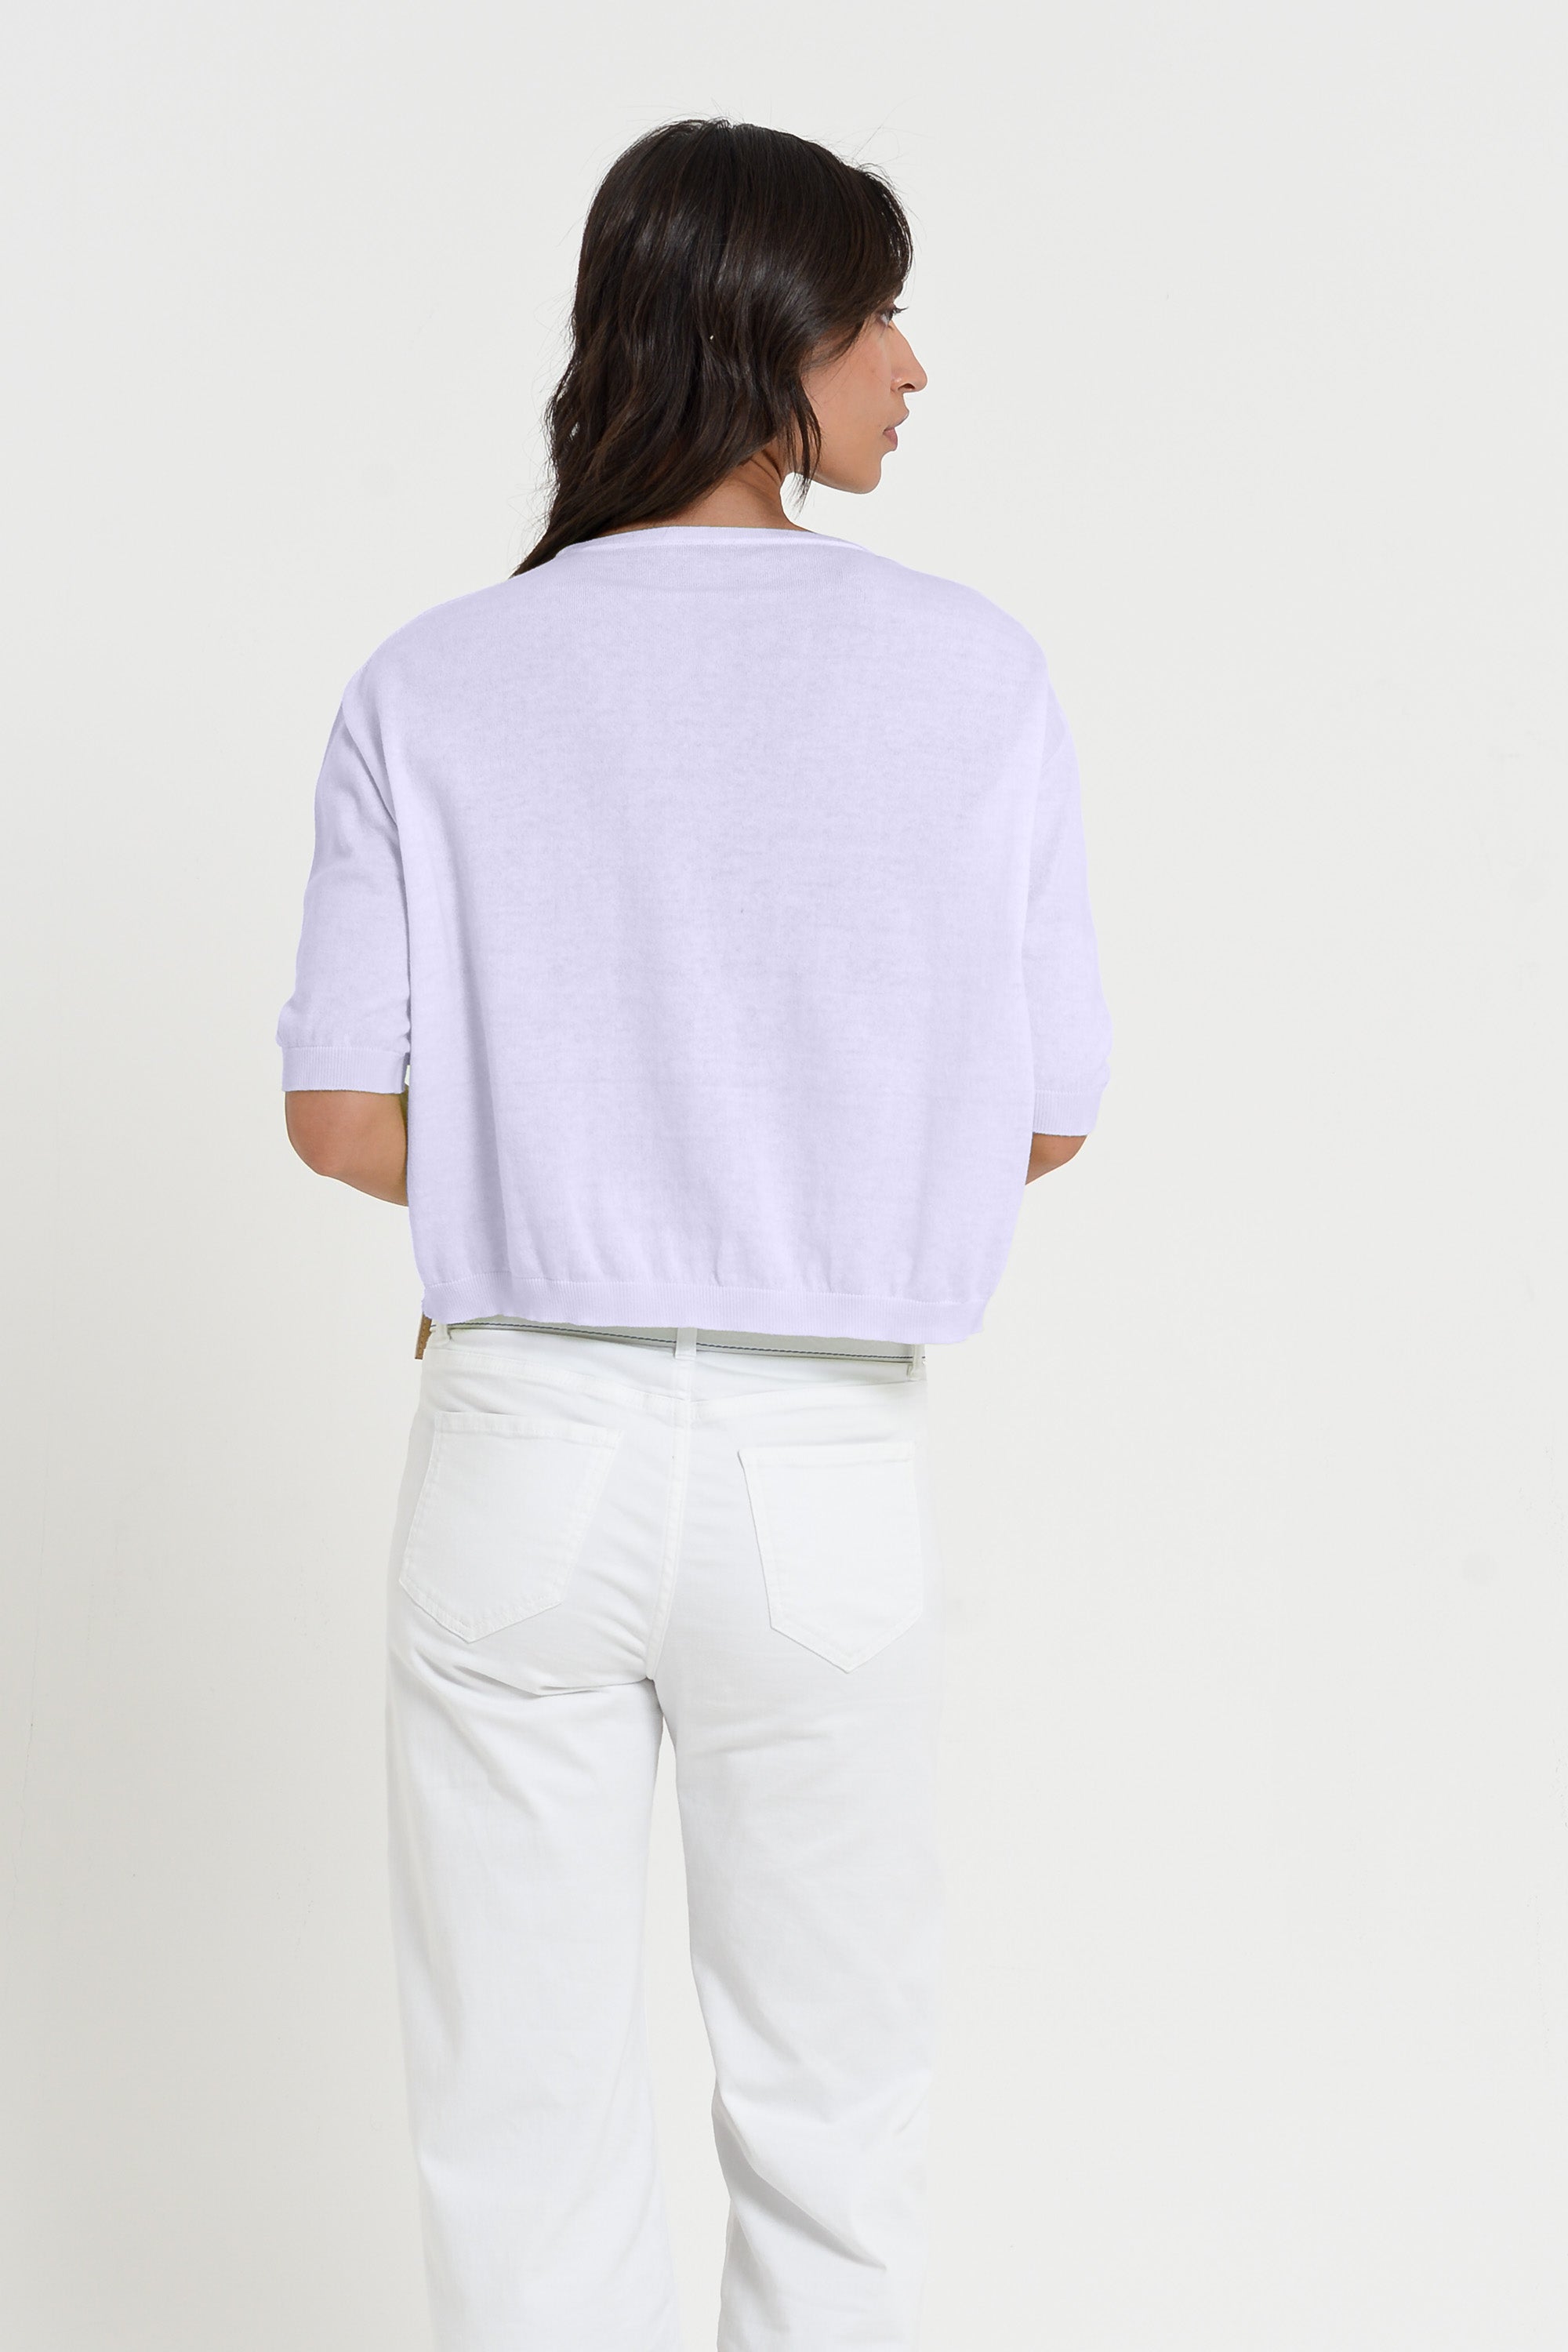 Kriss Knit - Women's Short Sleeve Cropped Sweater - Lilac